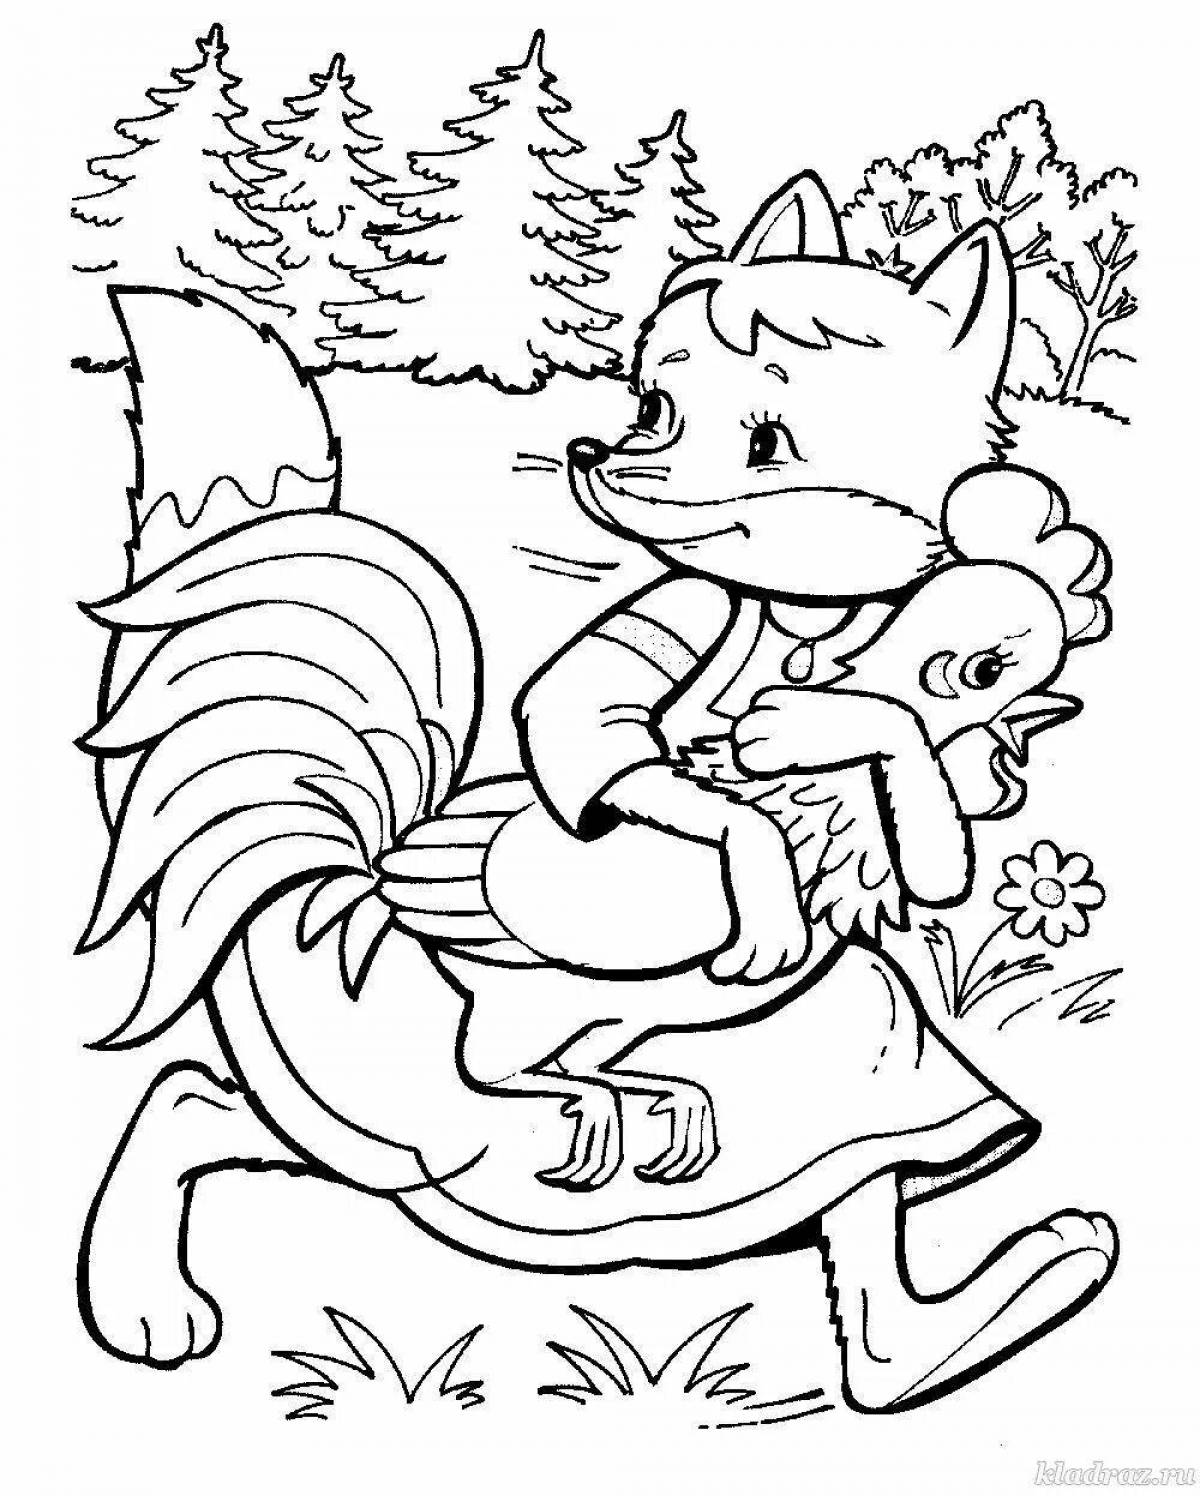 Cat cock and fox #2